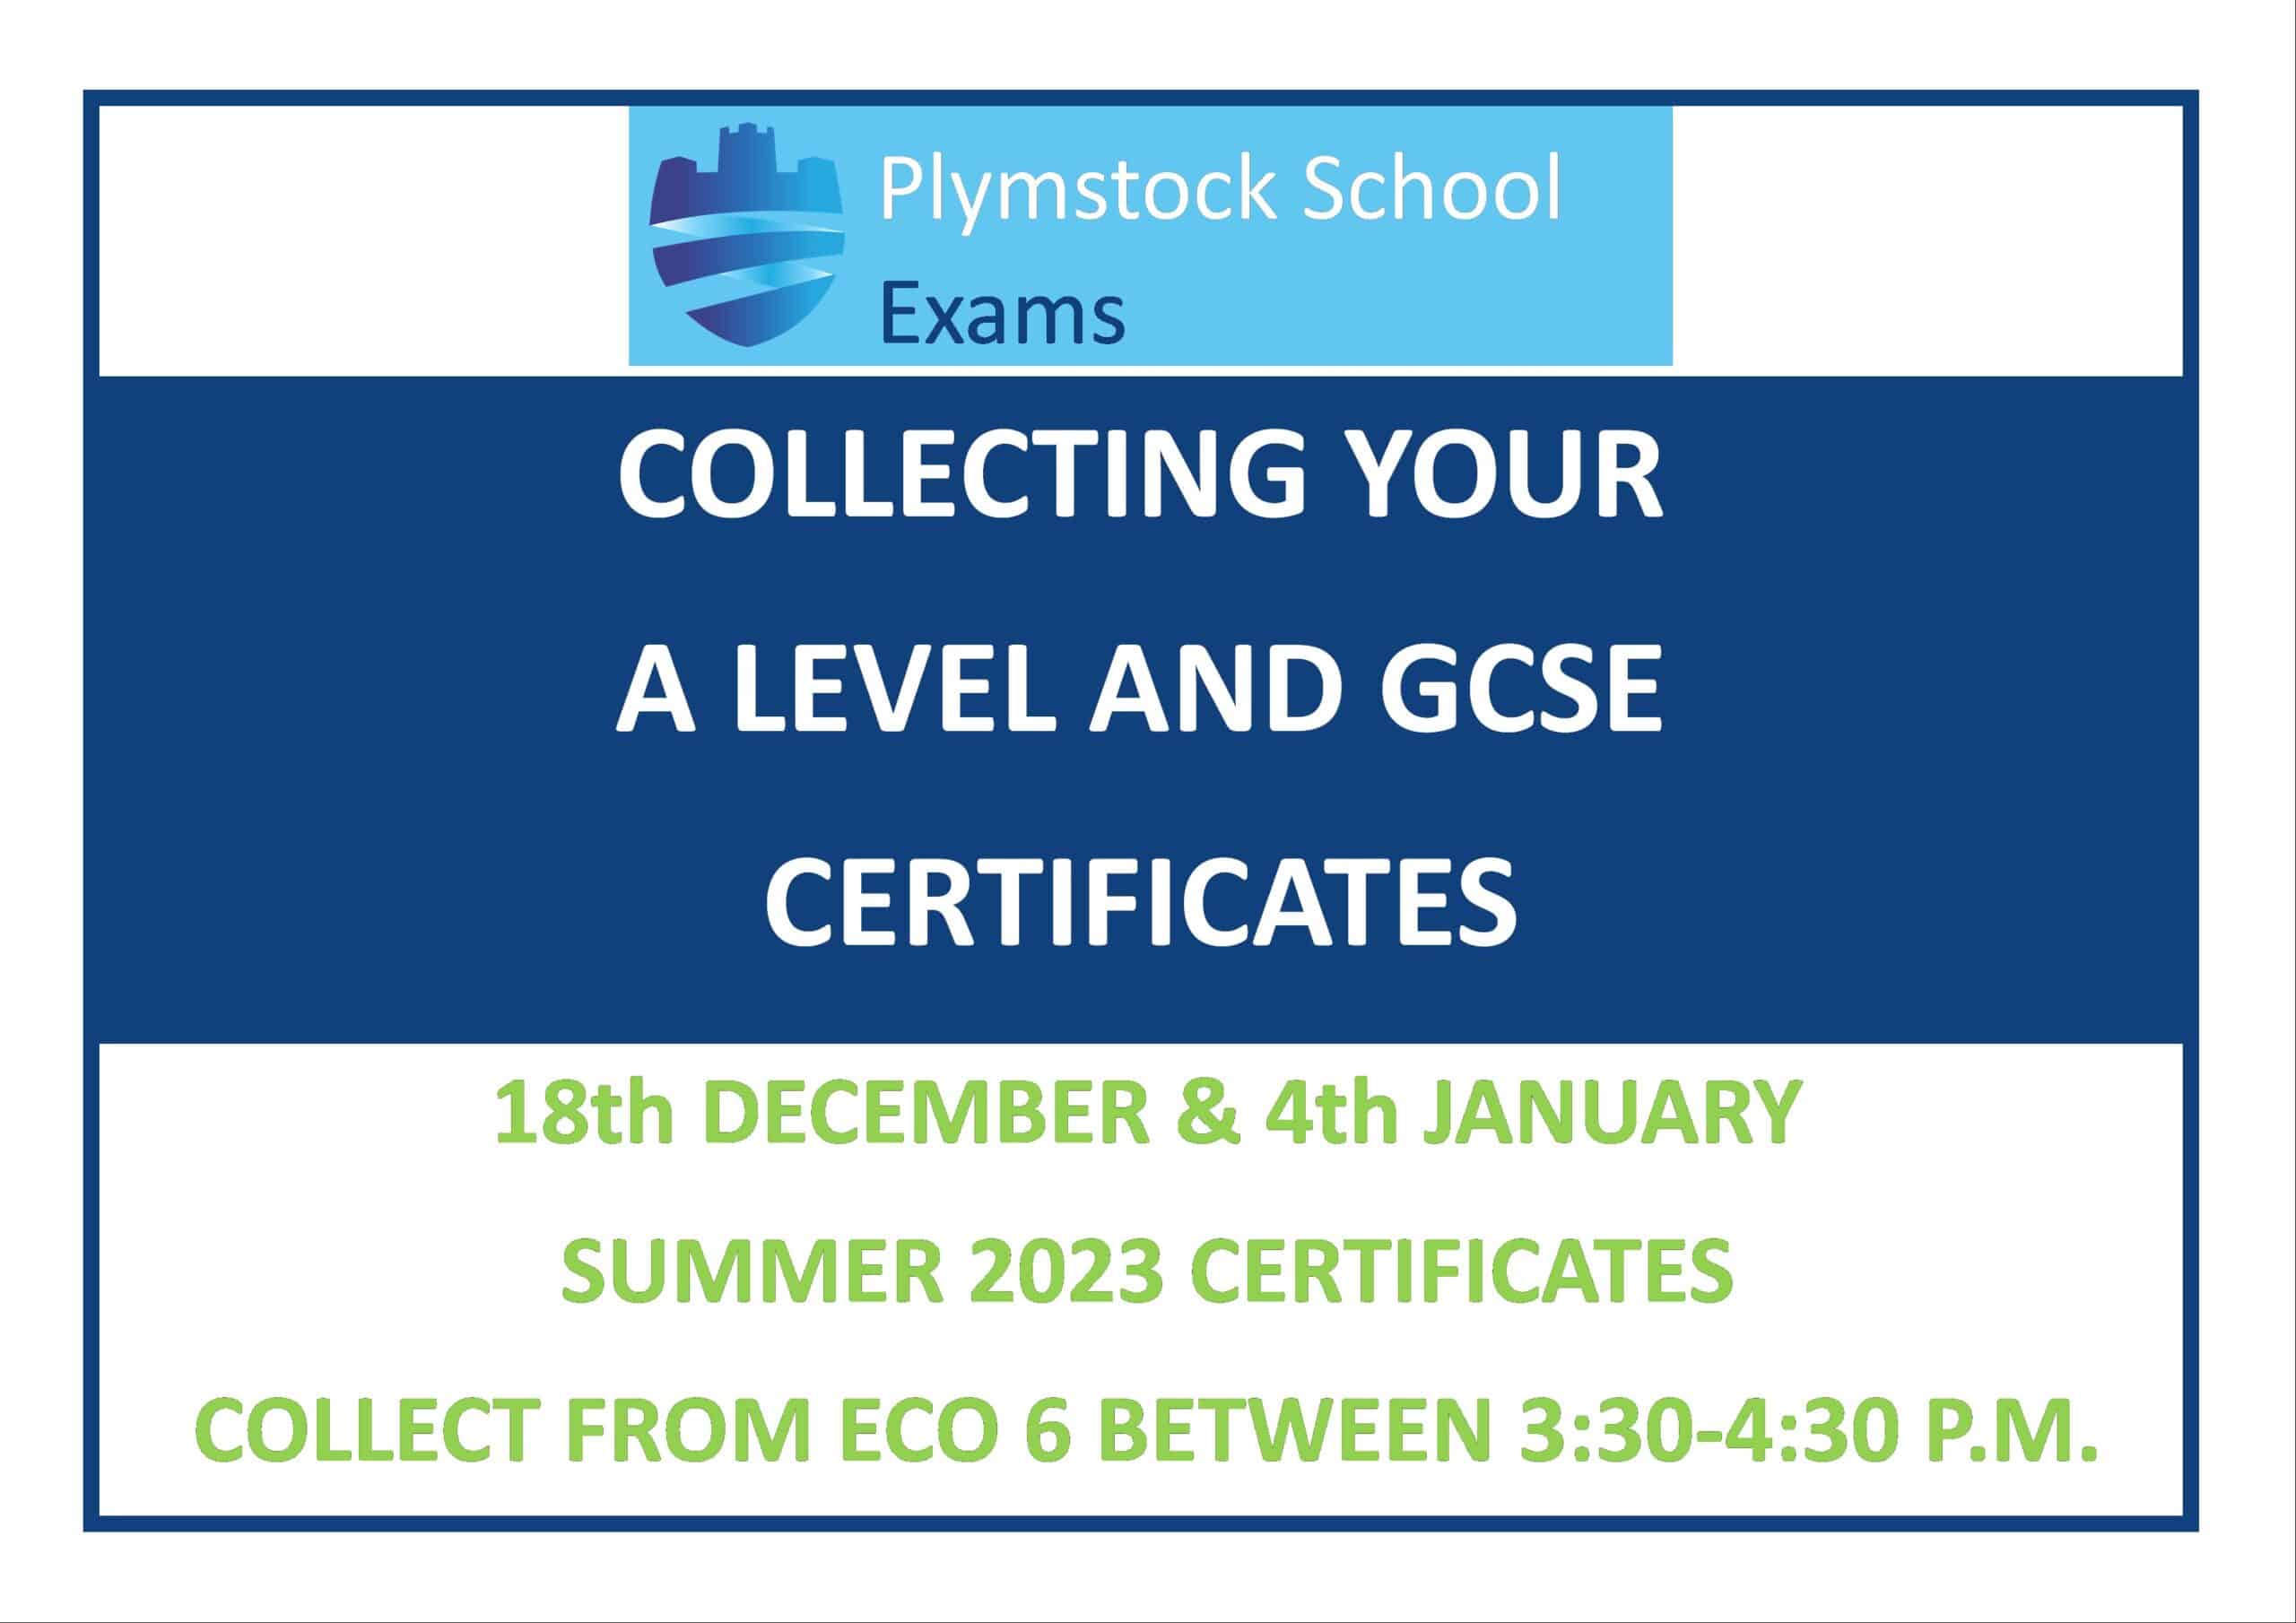 Exam certificate collection